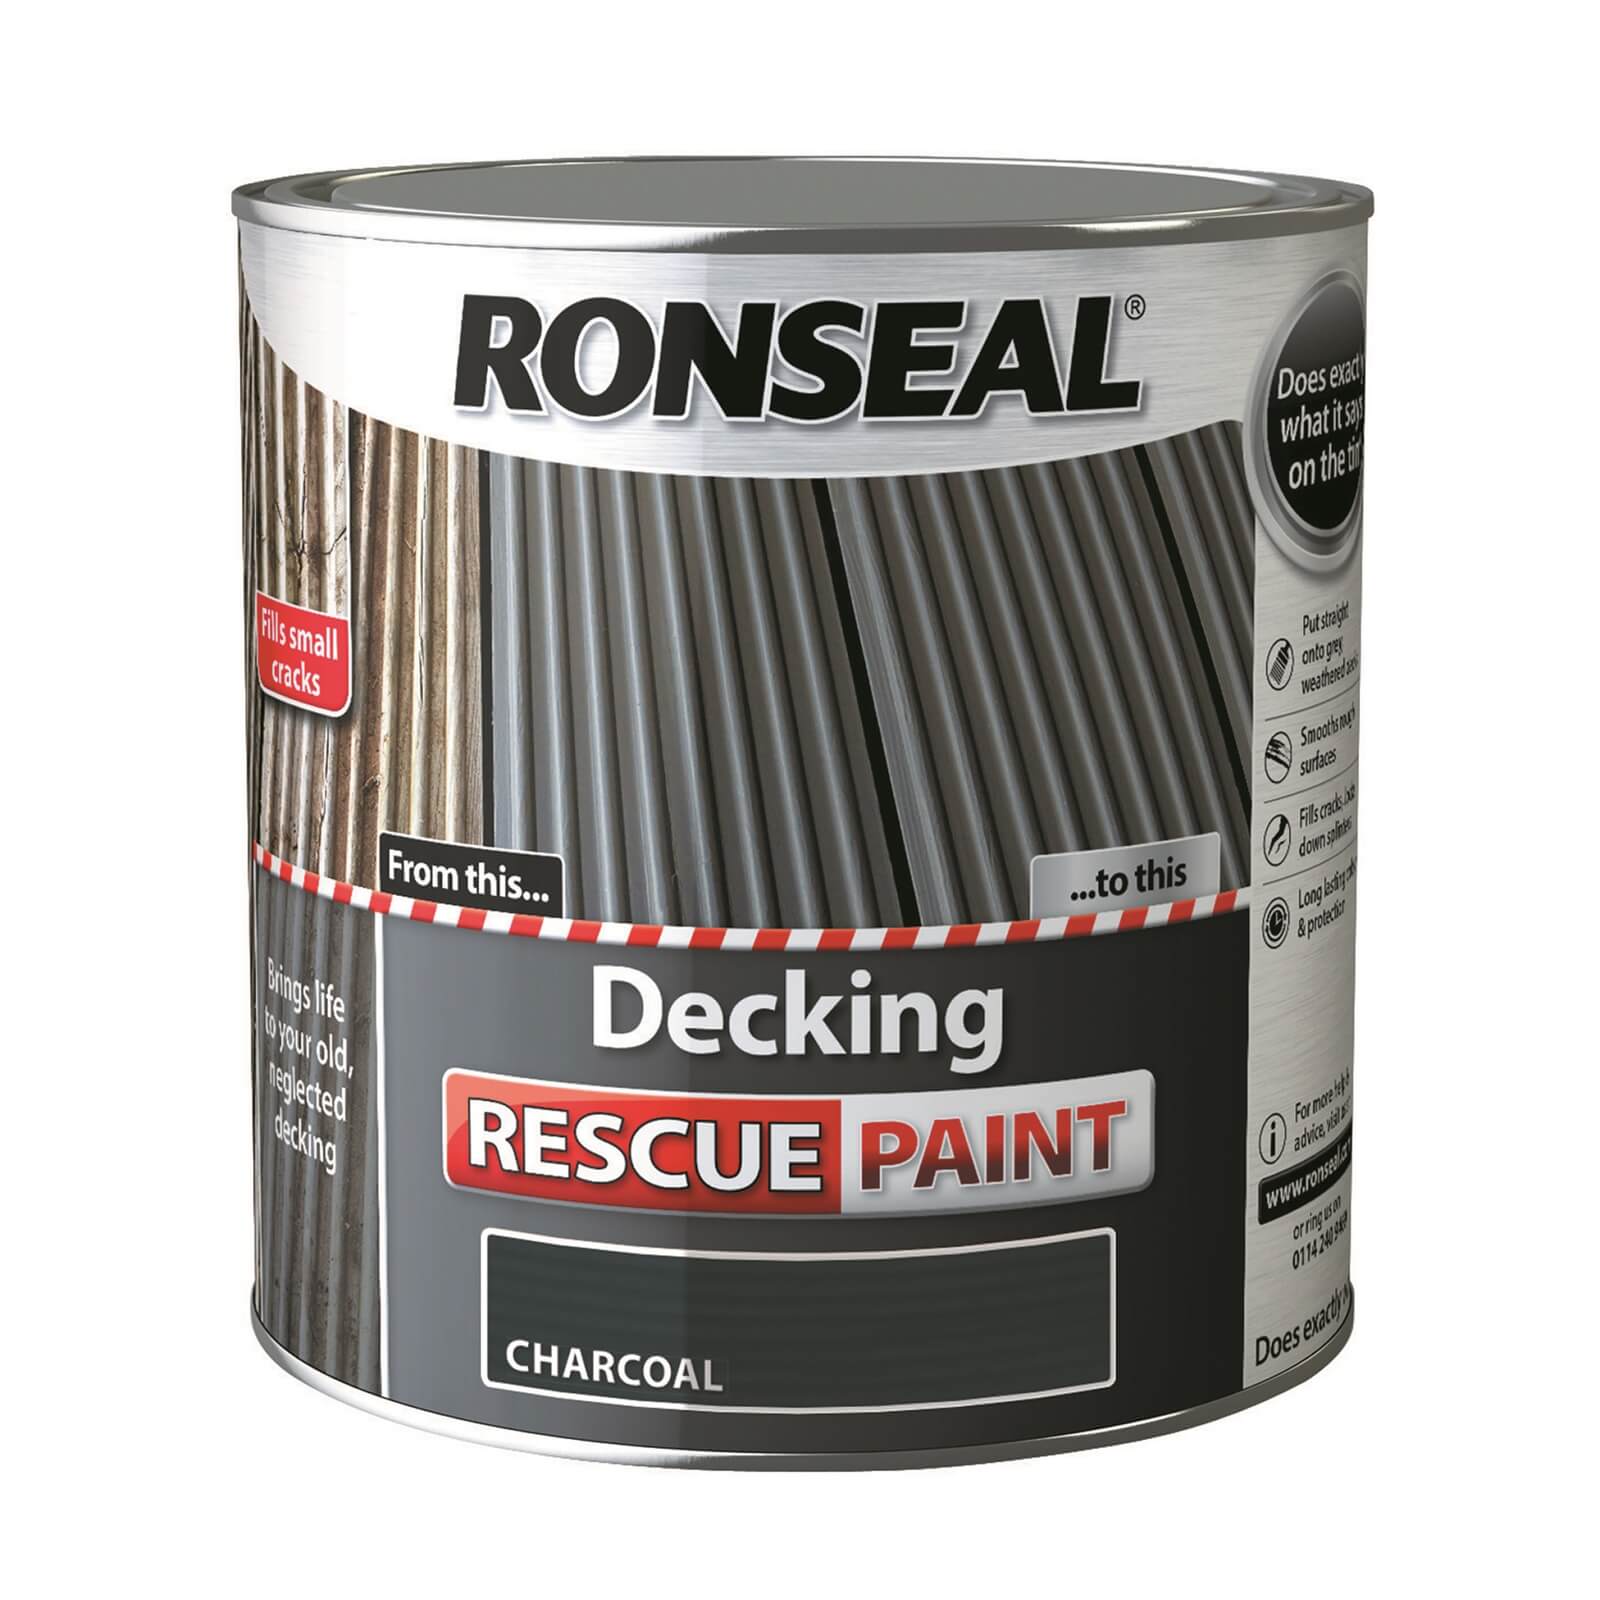 Ronseal Decking Rescue Paint Charcoal - 2.5L